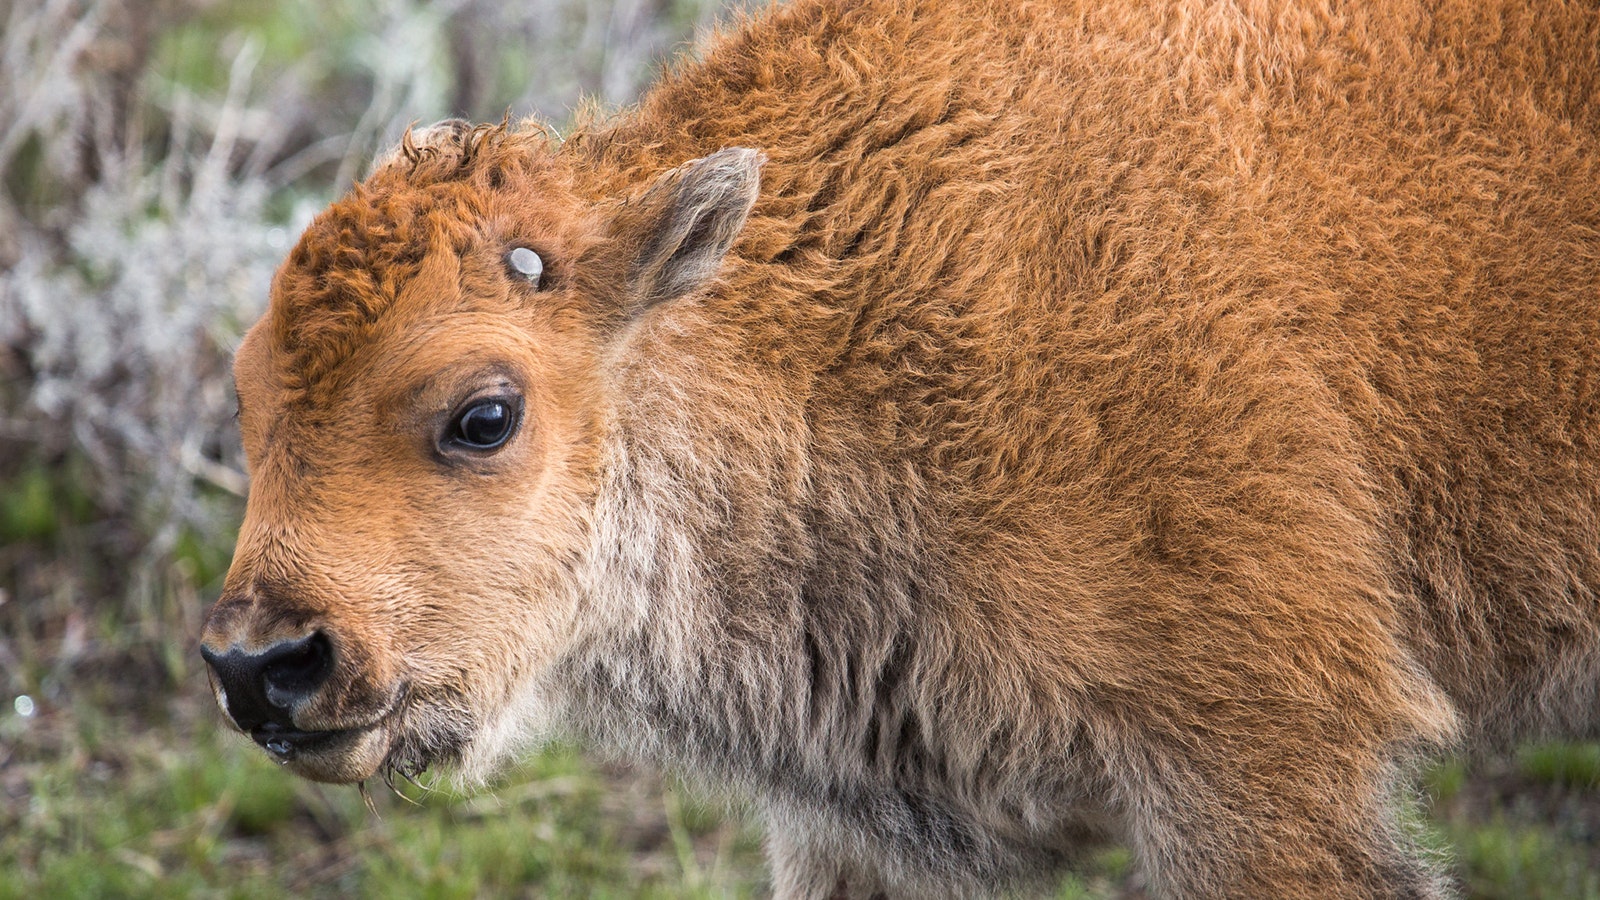 Yellowstone bison are caring for their newborn calves this time of year, which makes the potential for human interaction with them more dangerous.